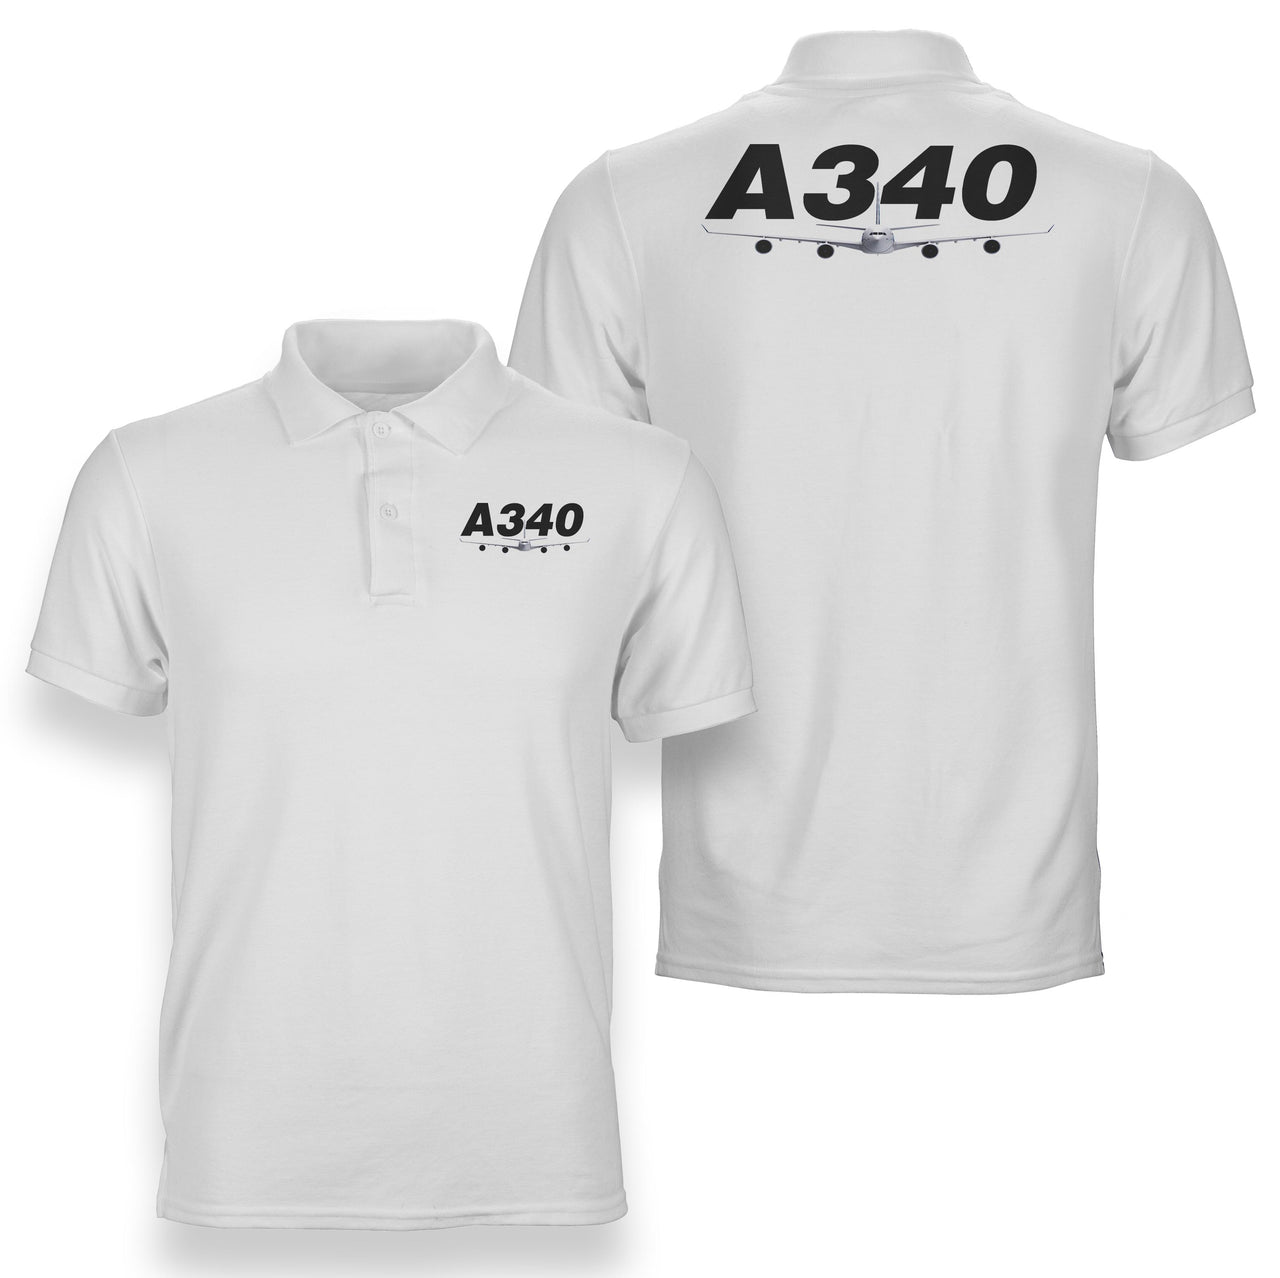 Super Airbus A340 Designed Double Side Polo T-Shirts